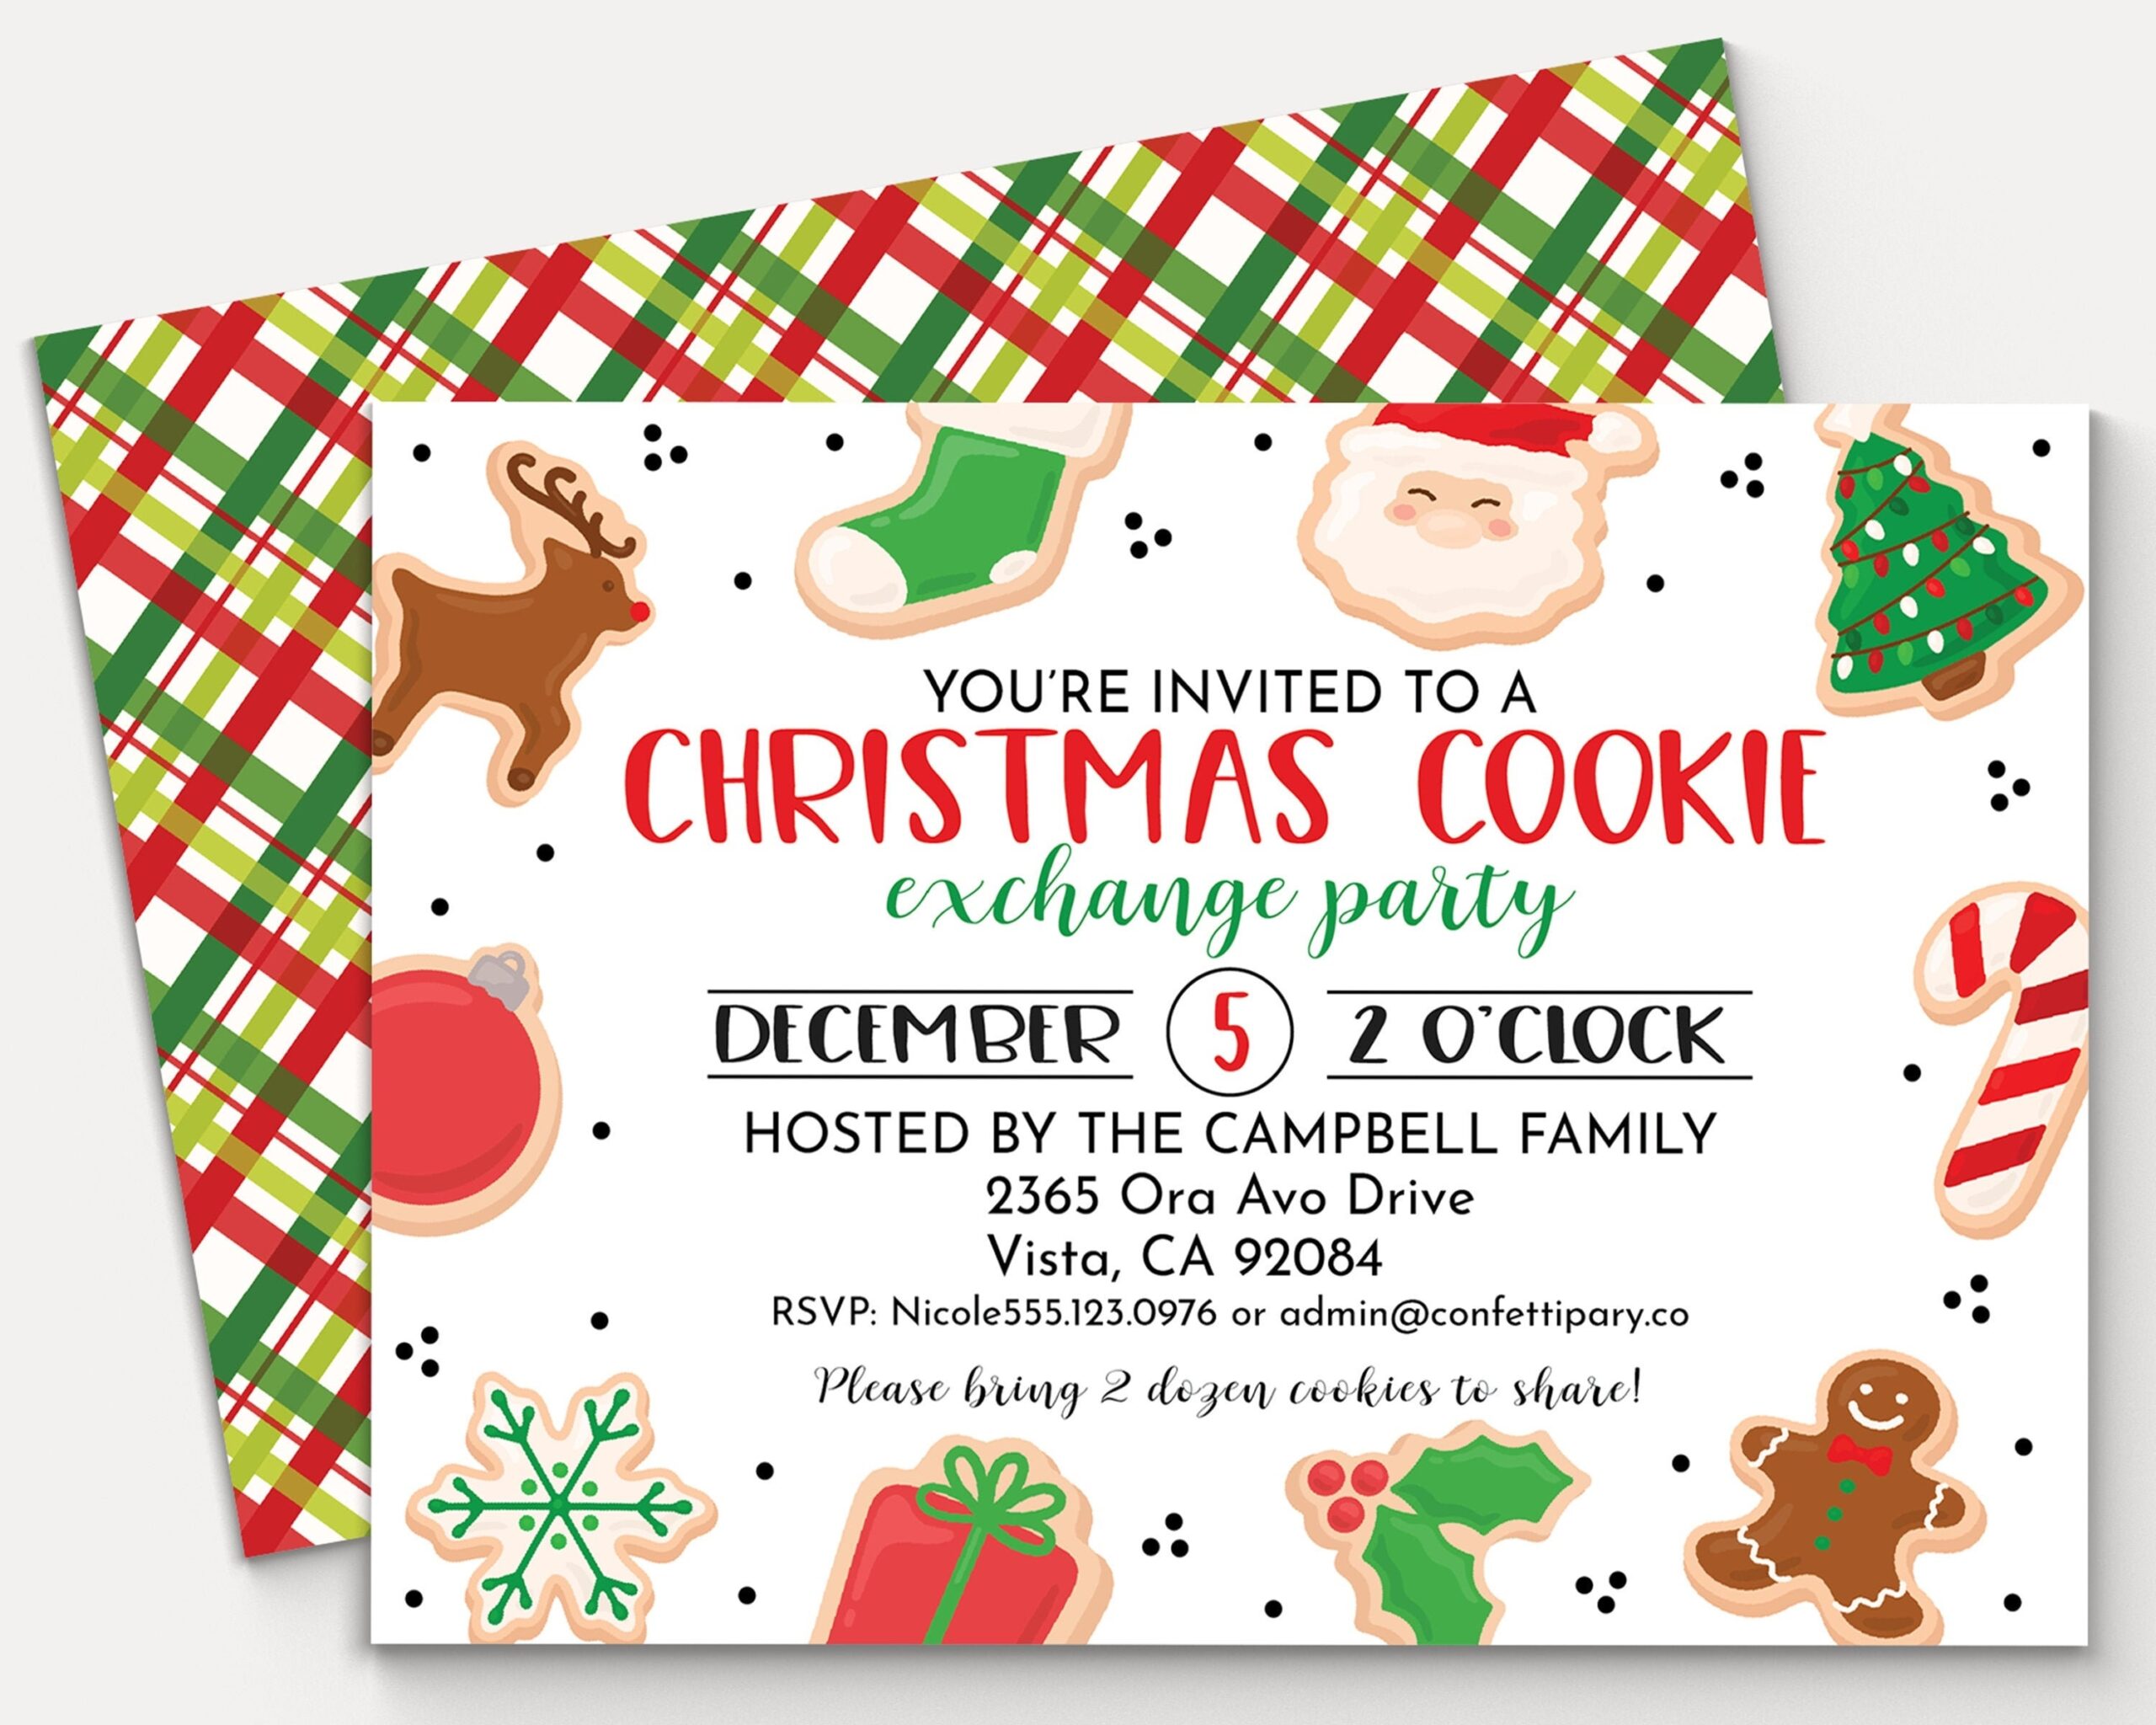 Christmas Cookie Exchange Invitation Holiday Cookie Swap Invitation Cookie Decorating Party Editable Invitation Template Etsy - Free Christmas Cookie Exchange Printable Invitation